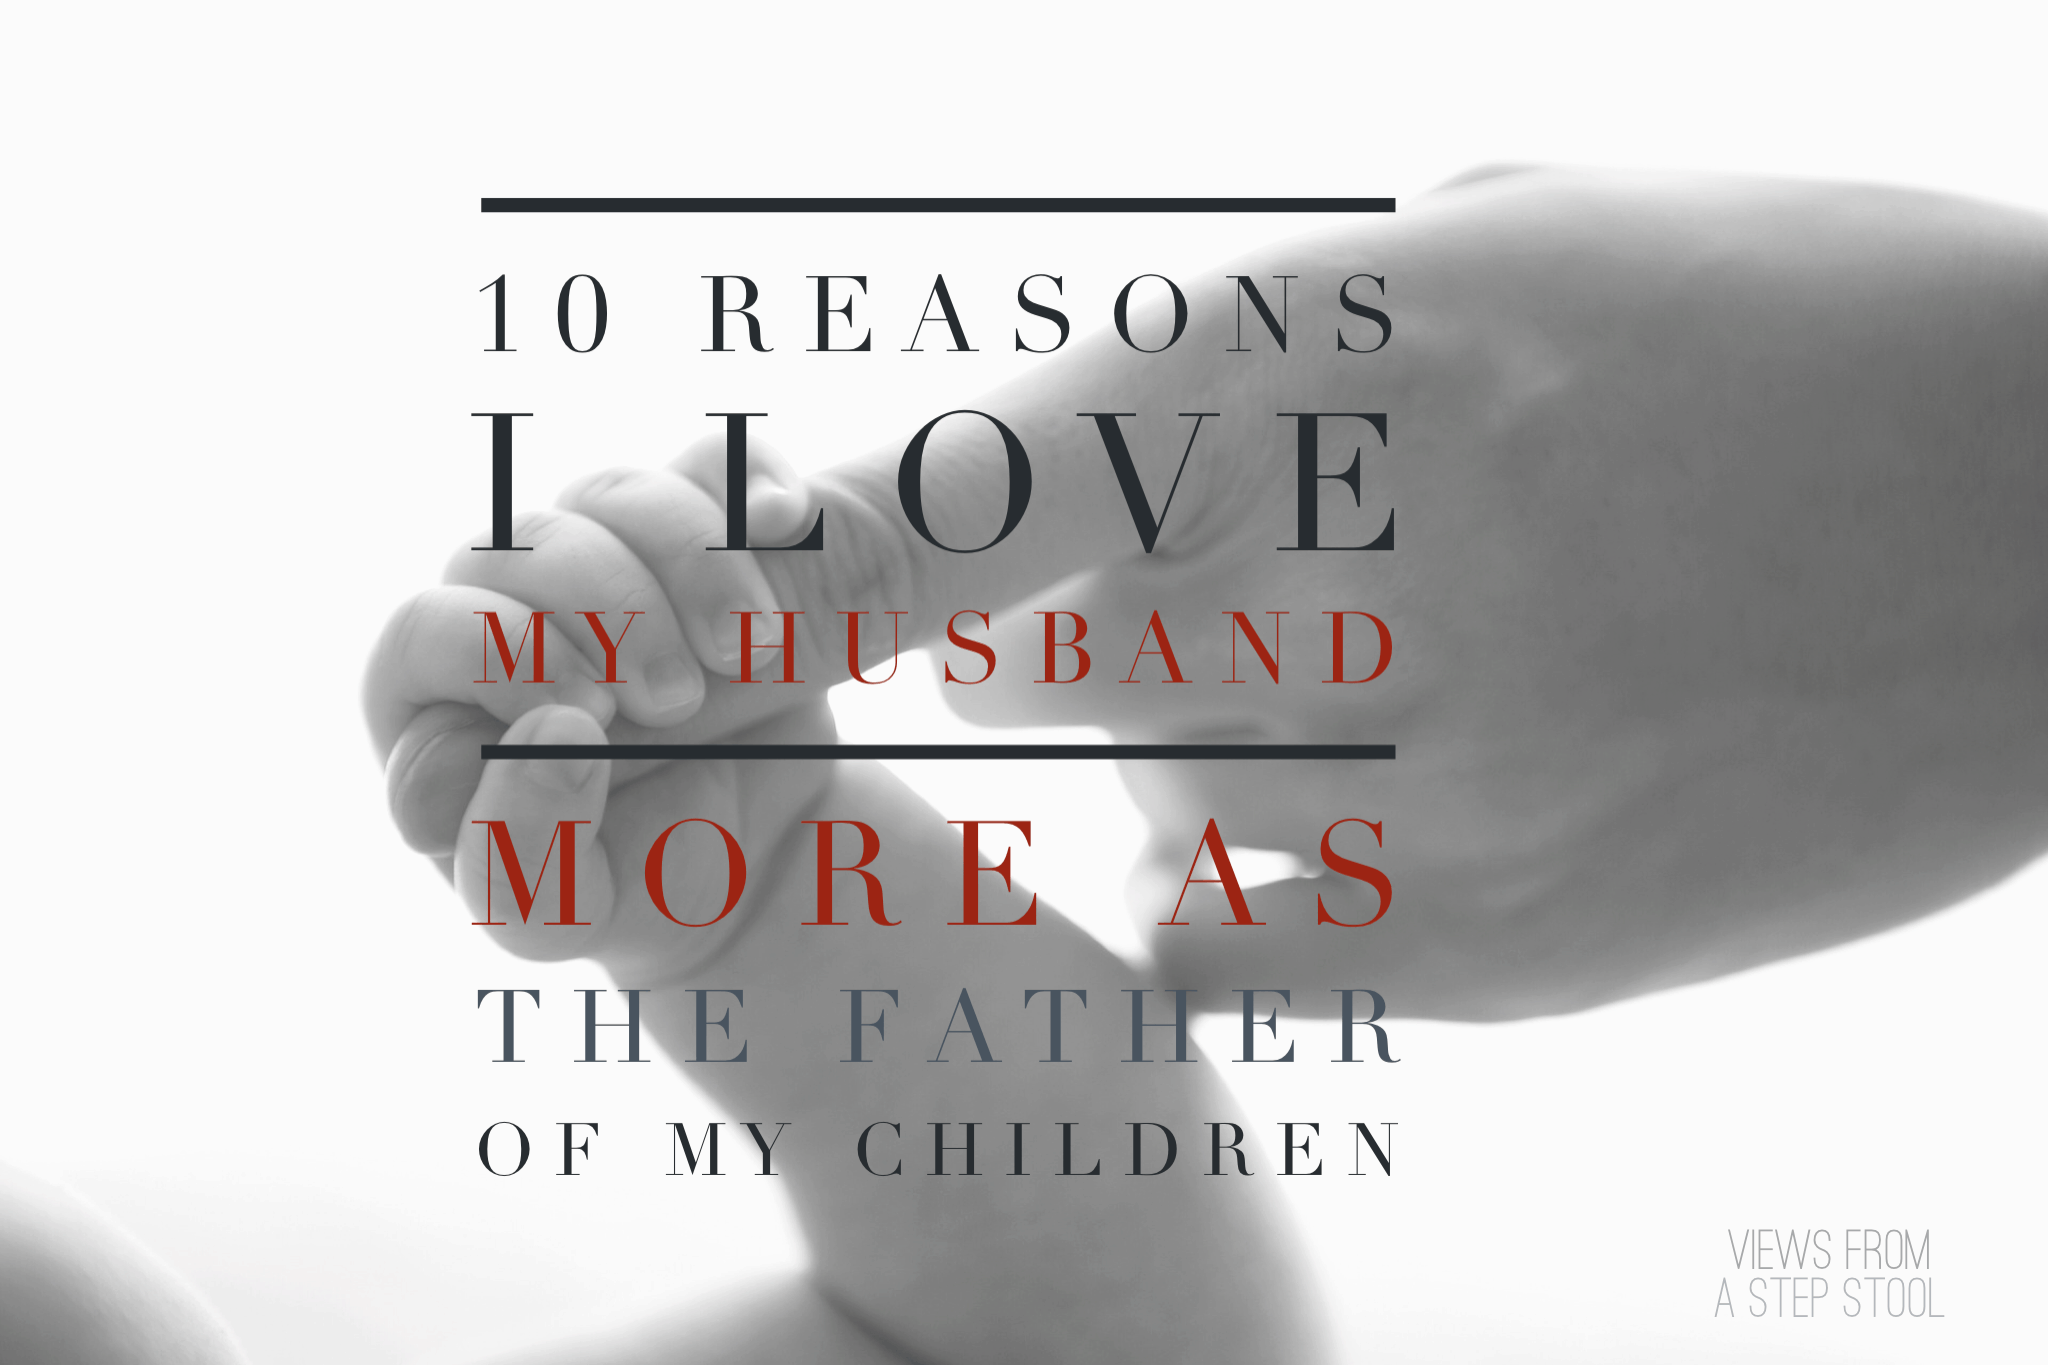 There are so many reasons yo love your spouse differently after having children with them, here are some of mine.